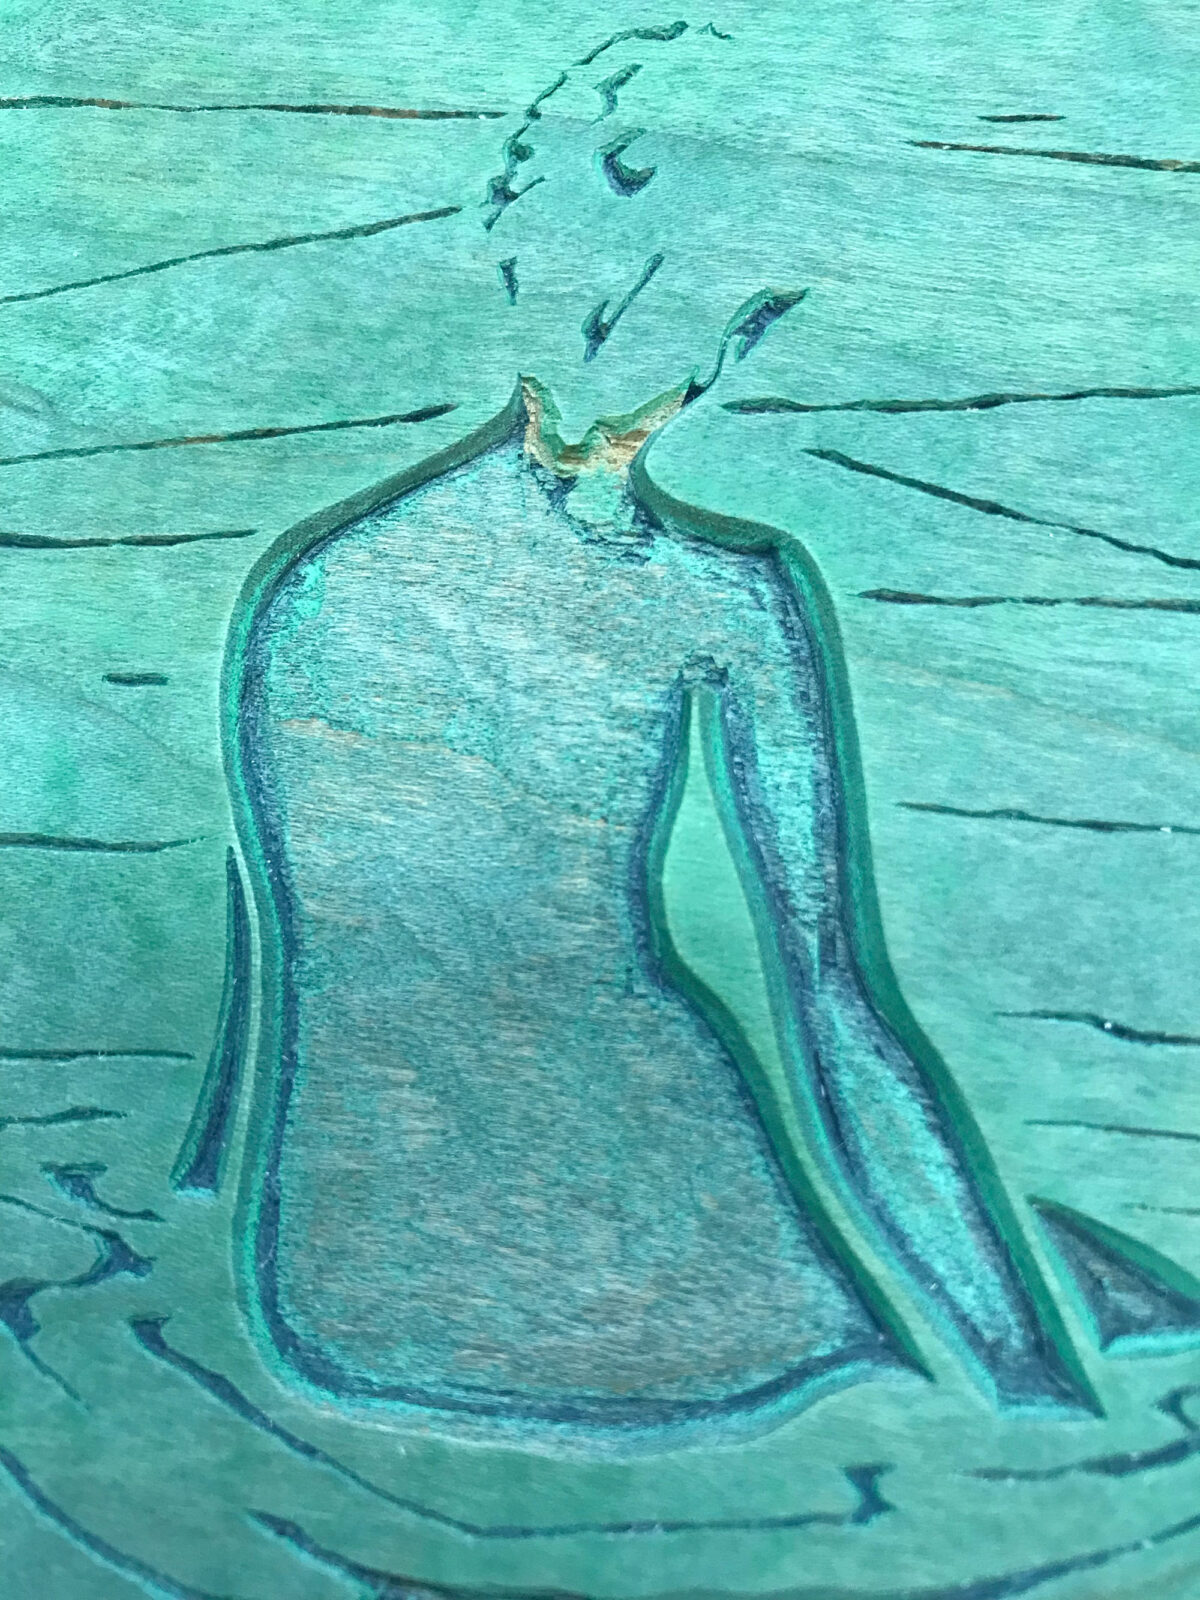 Green block - close up for Female Nude, after Narumi woodblock print Claire Cameron-Smith